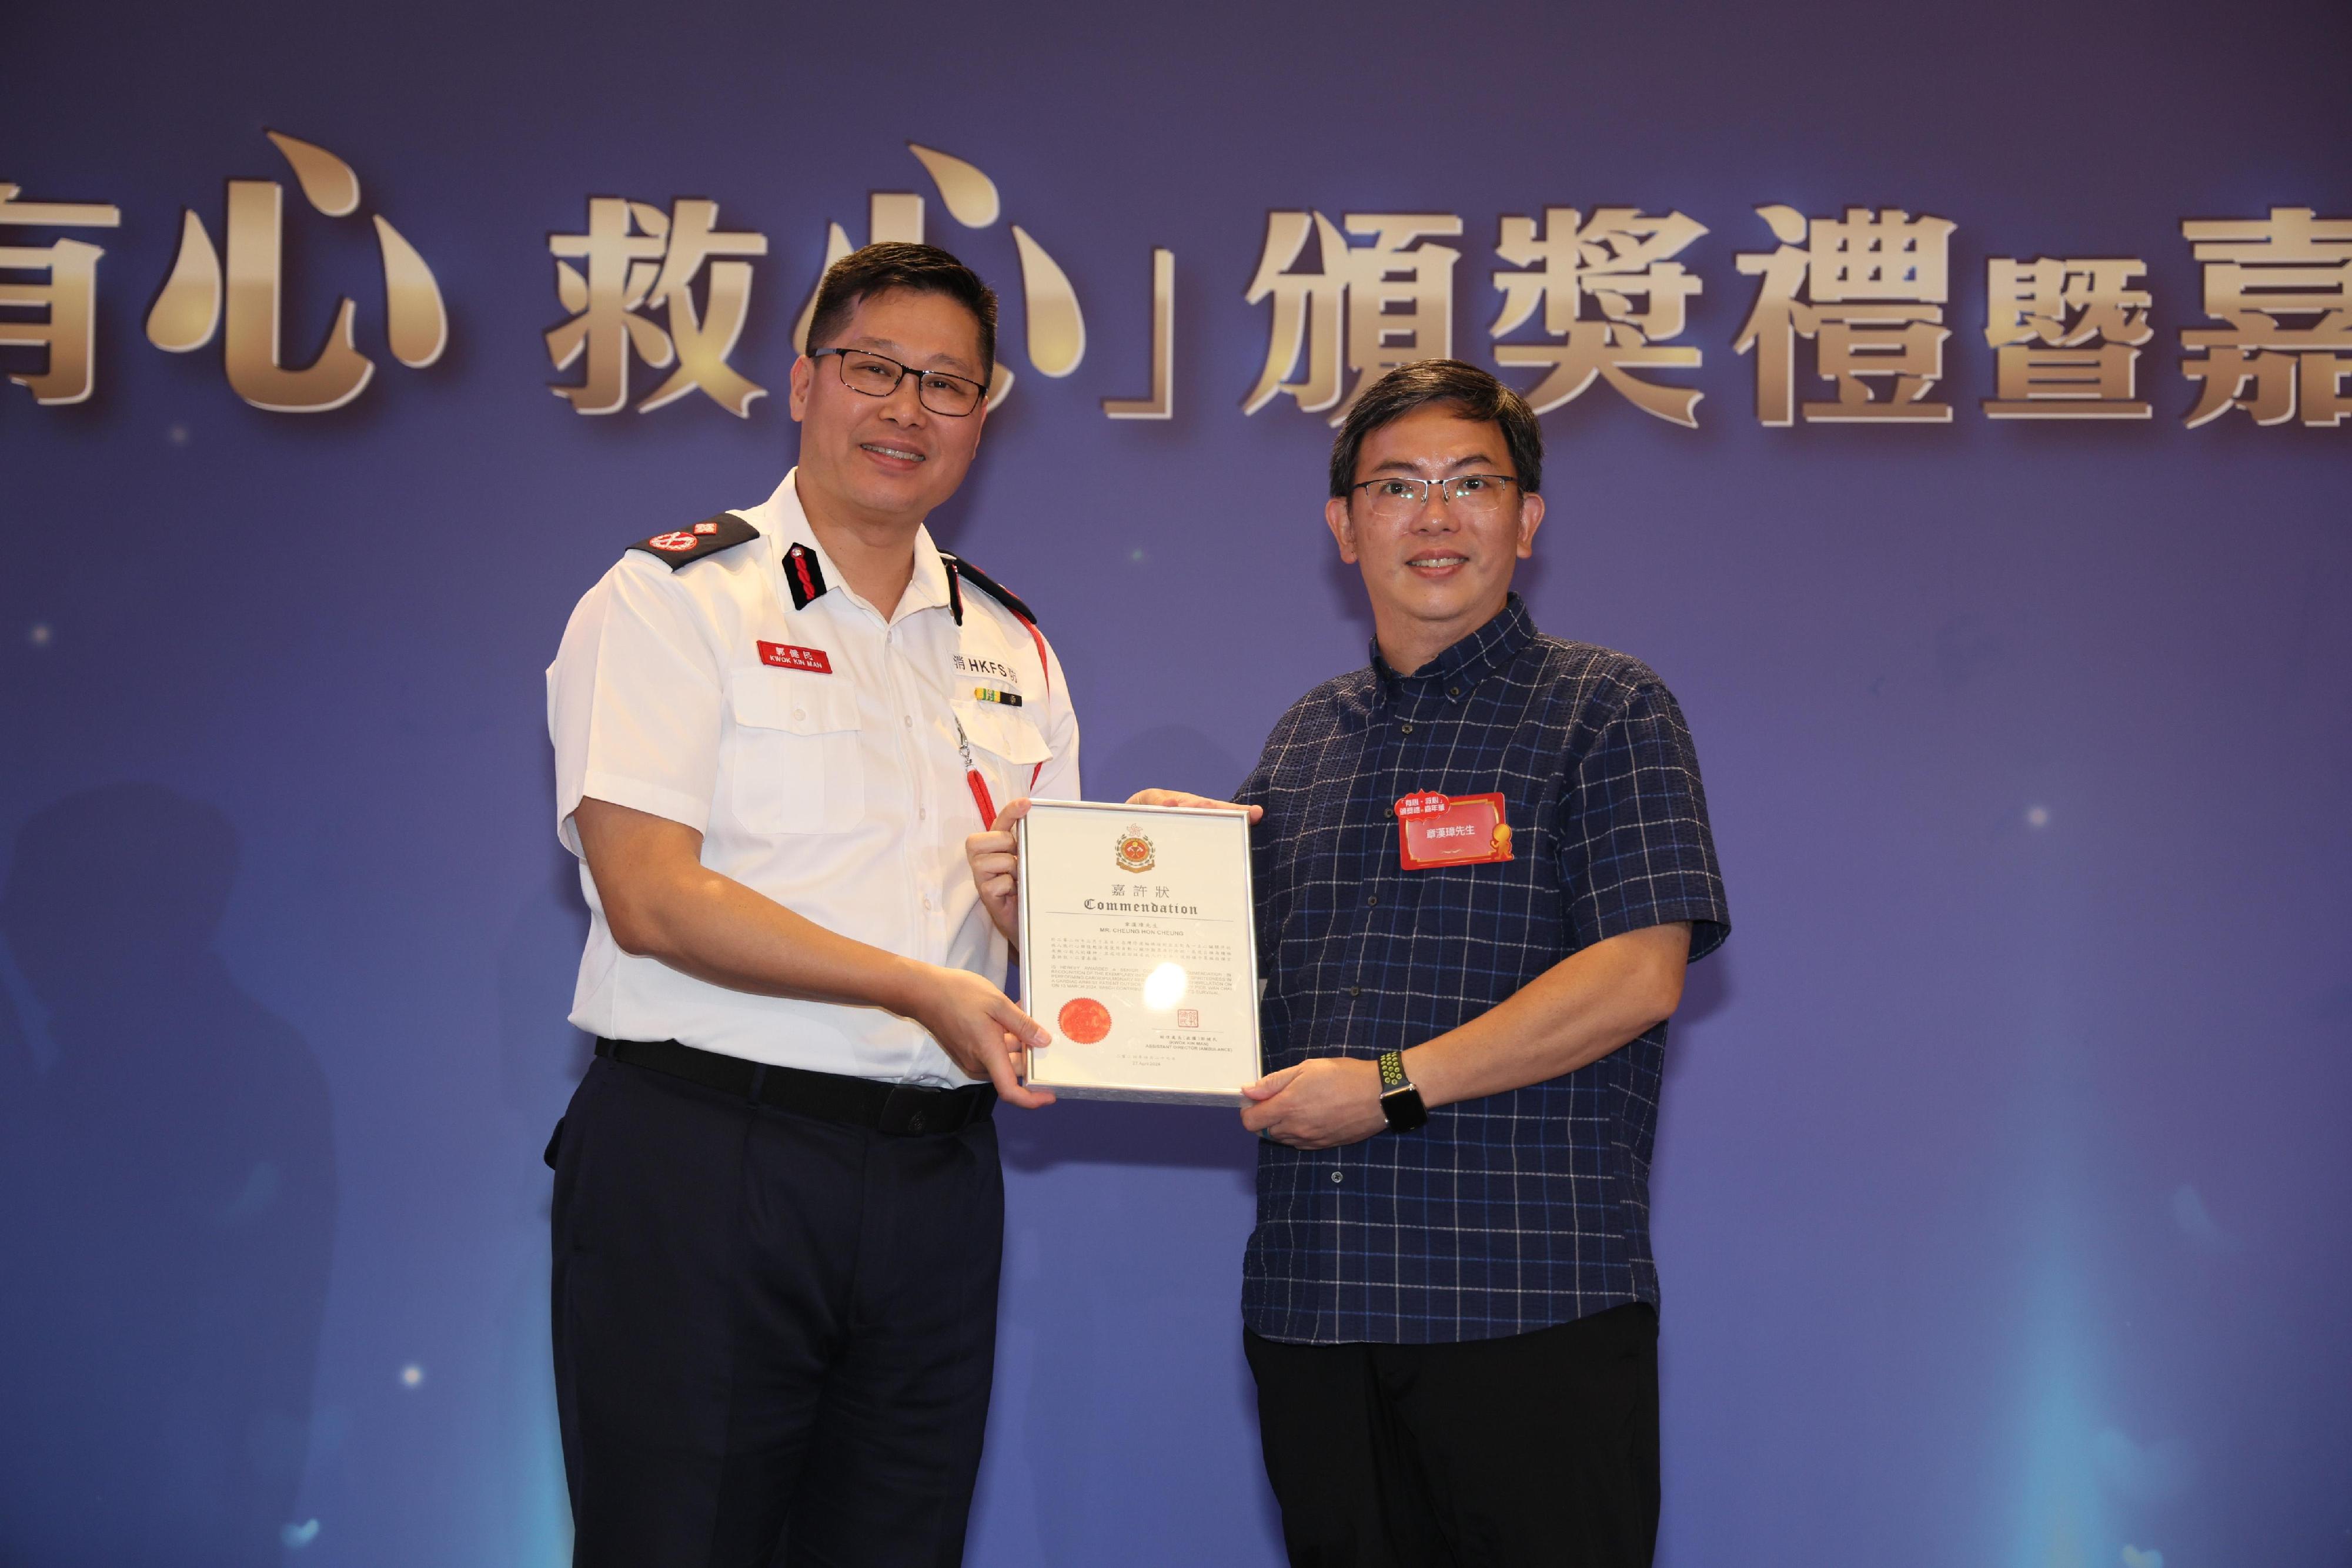 The Fire Services Department (FSD) today (April 27) held the Big Hearts, Save Hearts Awards Ceremony cum Carnival. Photo shows the Assistant Director (Ambulance) of the FSD, Mr Henry Kwok (left), presenting the "Save Heart Award" to the awardee.